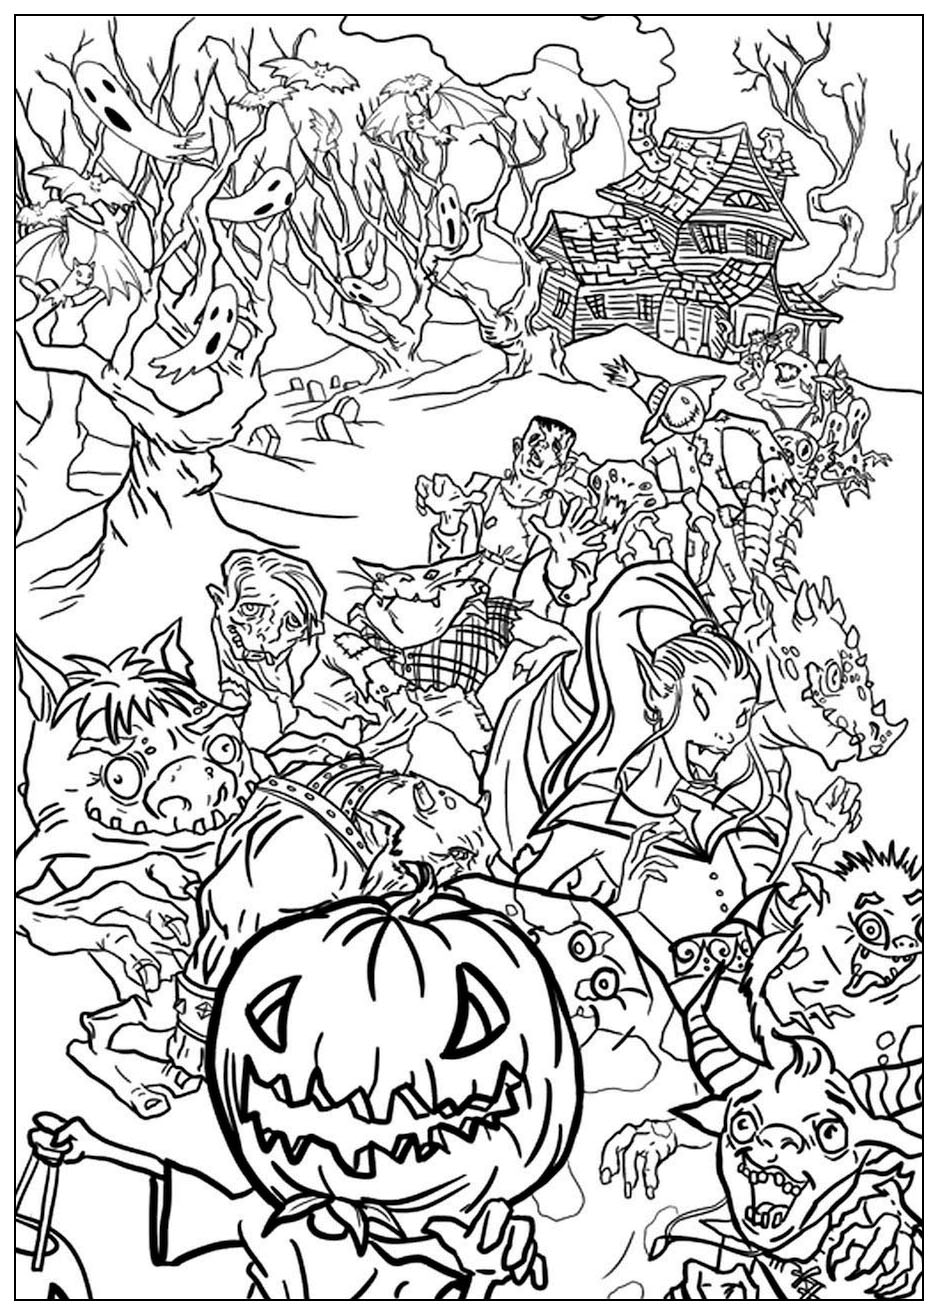 Fun Halloween coloring pages to print and color